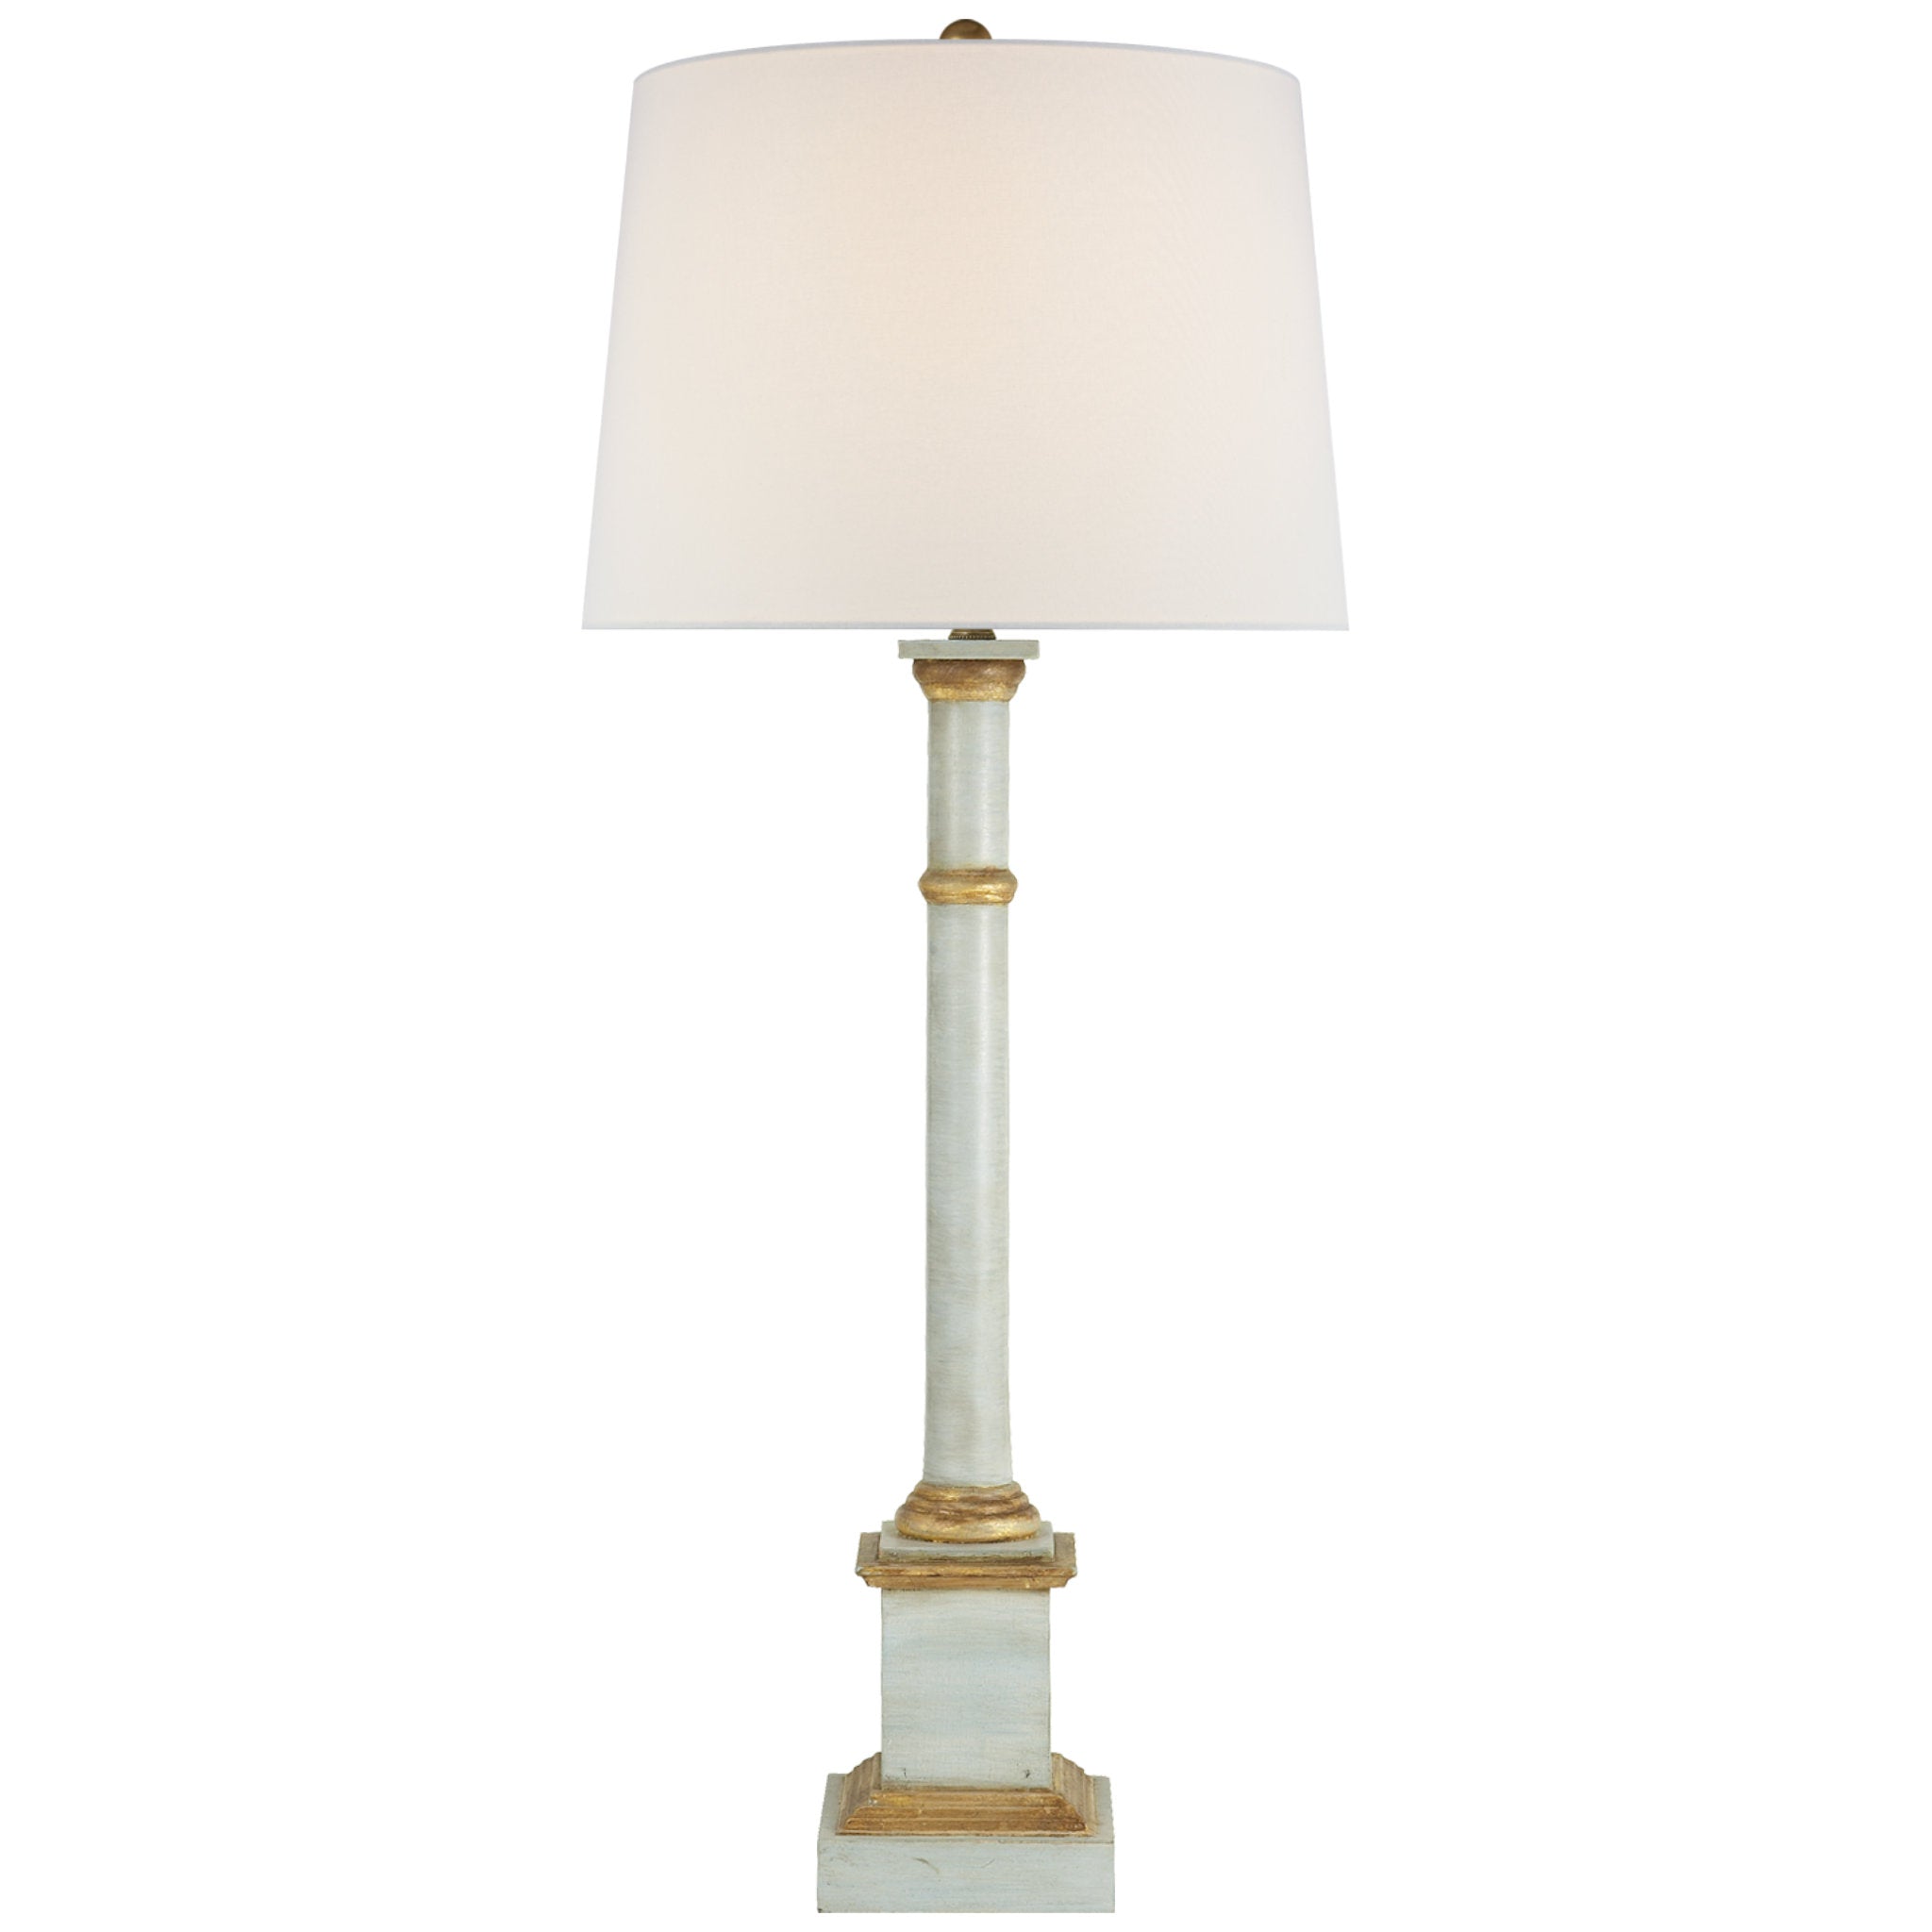 Suzanne Kasler Josephine Table Lamp in Light Blue with Antique Gold Leaf with Linen Shade